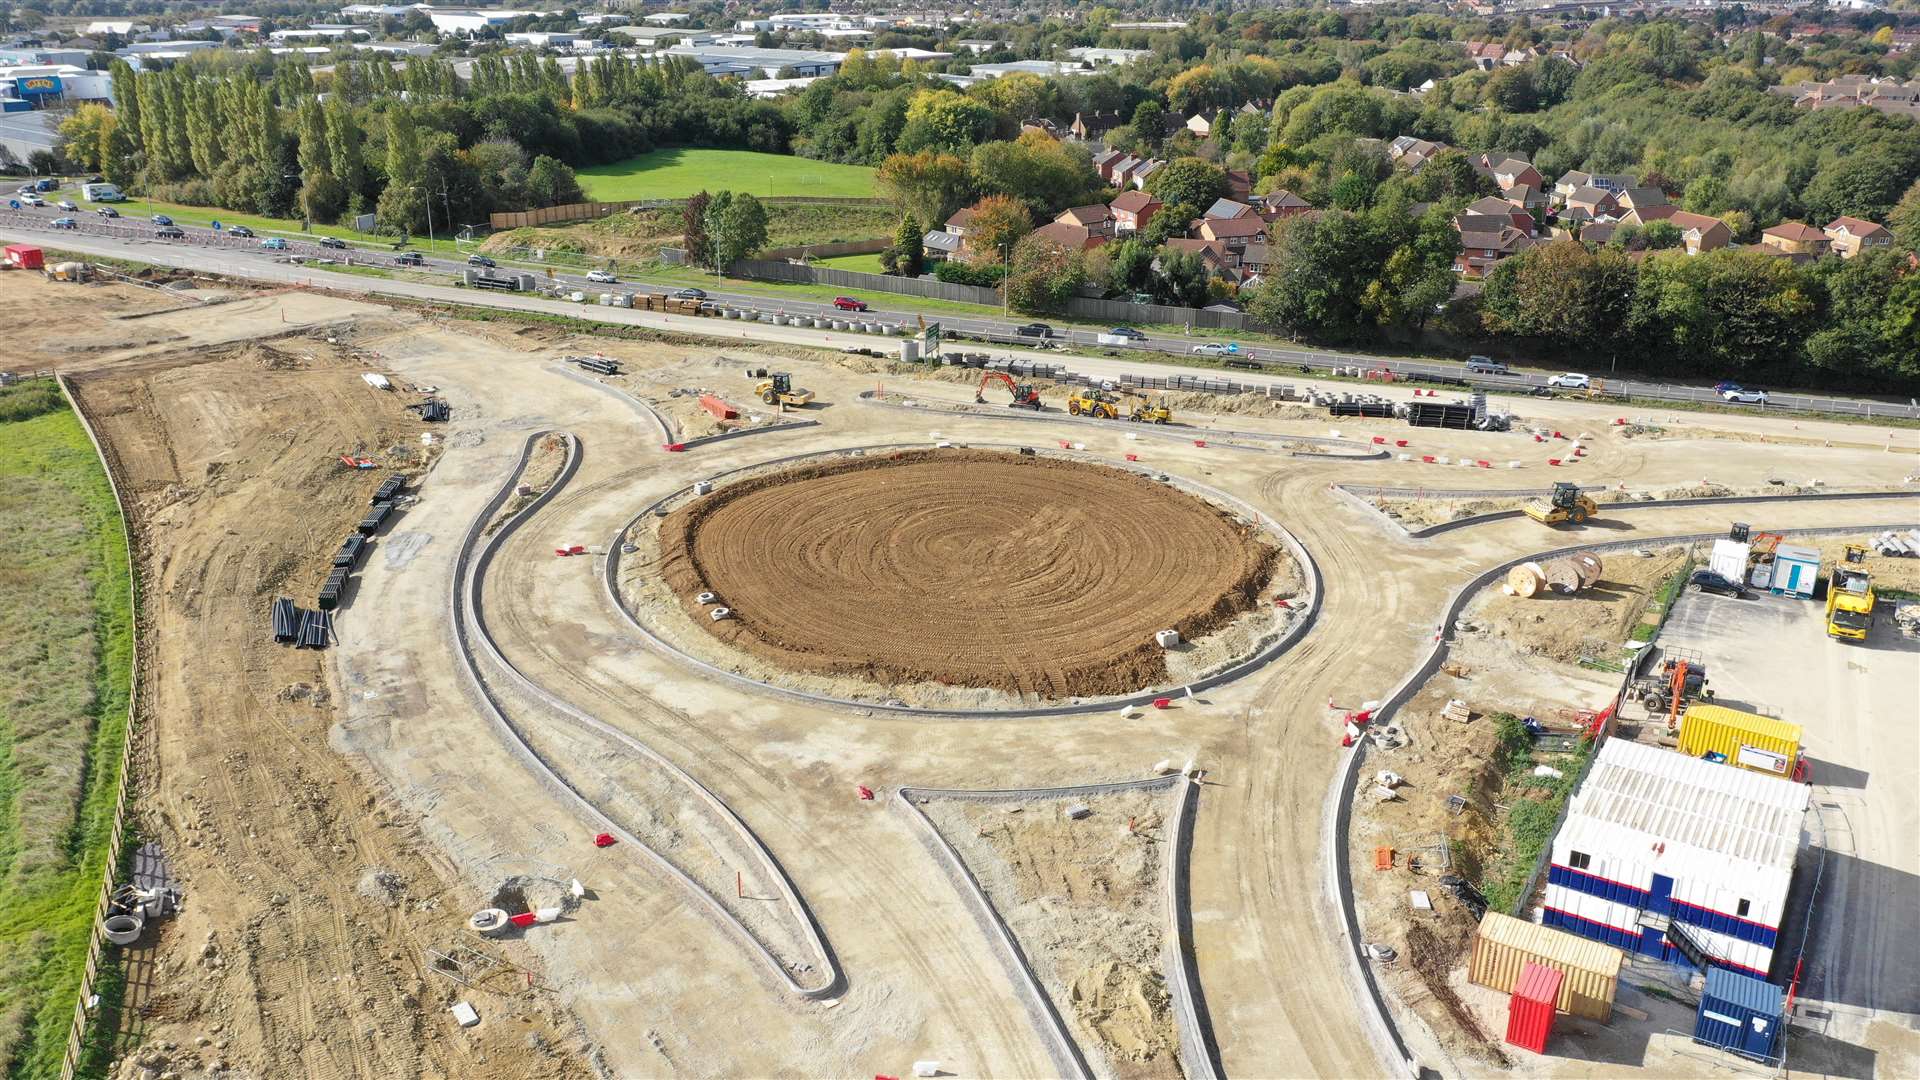 The new roundabout is close to the Orbital Park. Picture: Vantage Photography / info@vantage-photography.co.uk